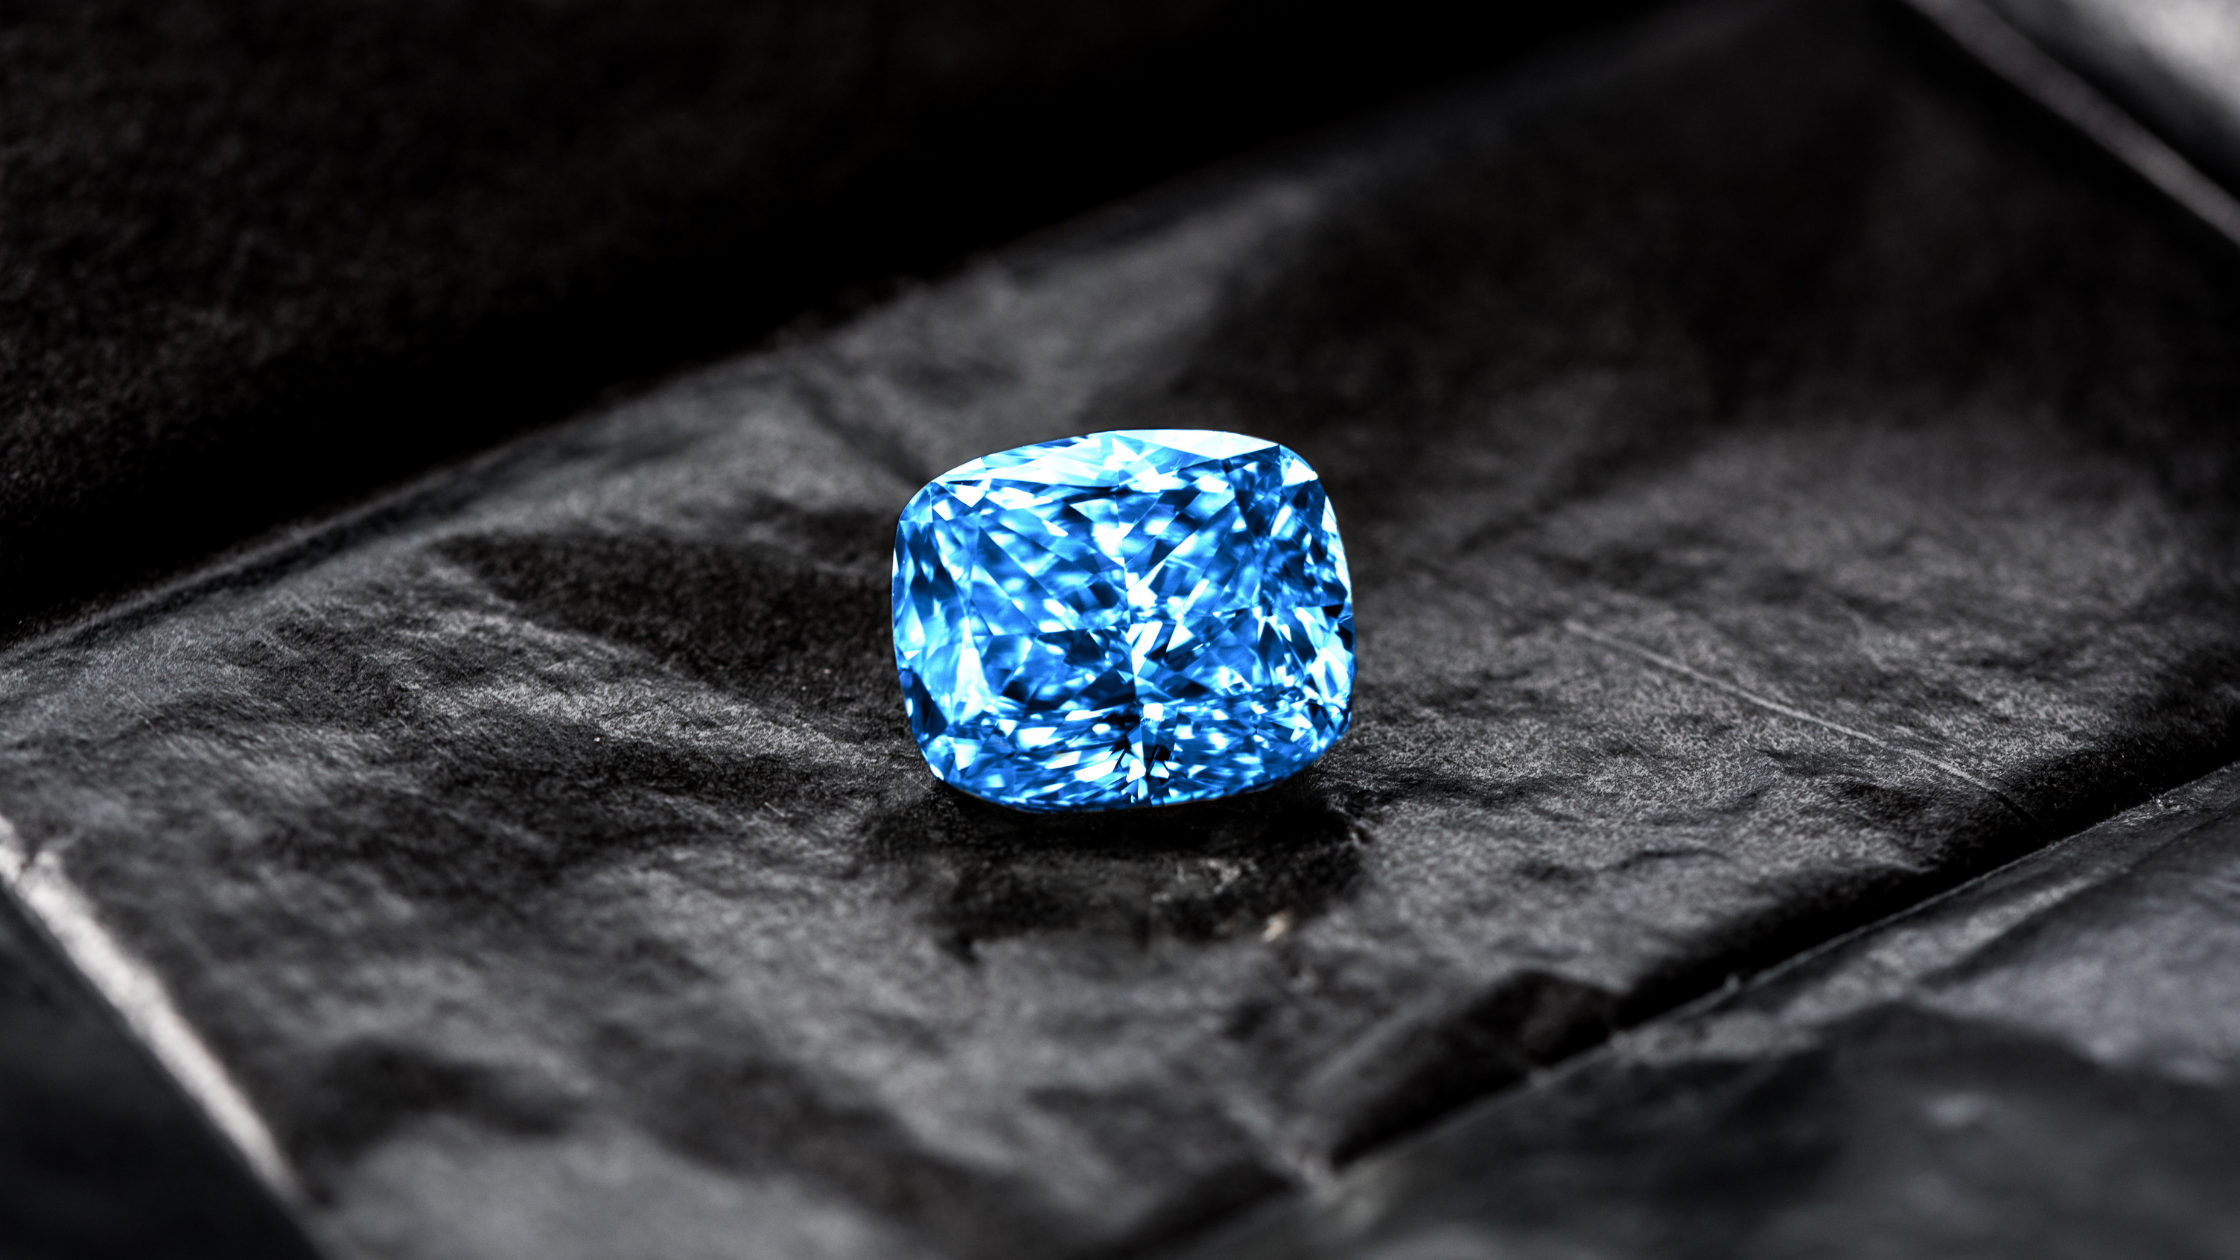 What Is a Blue Diamond?